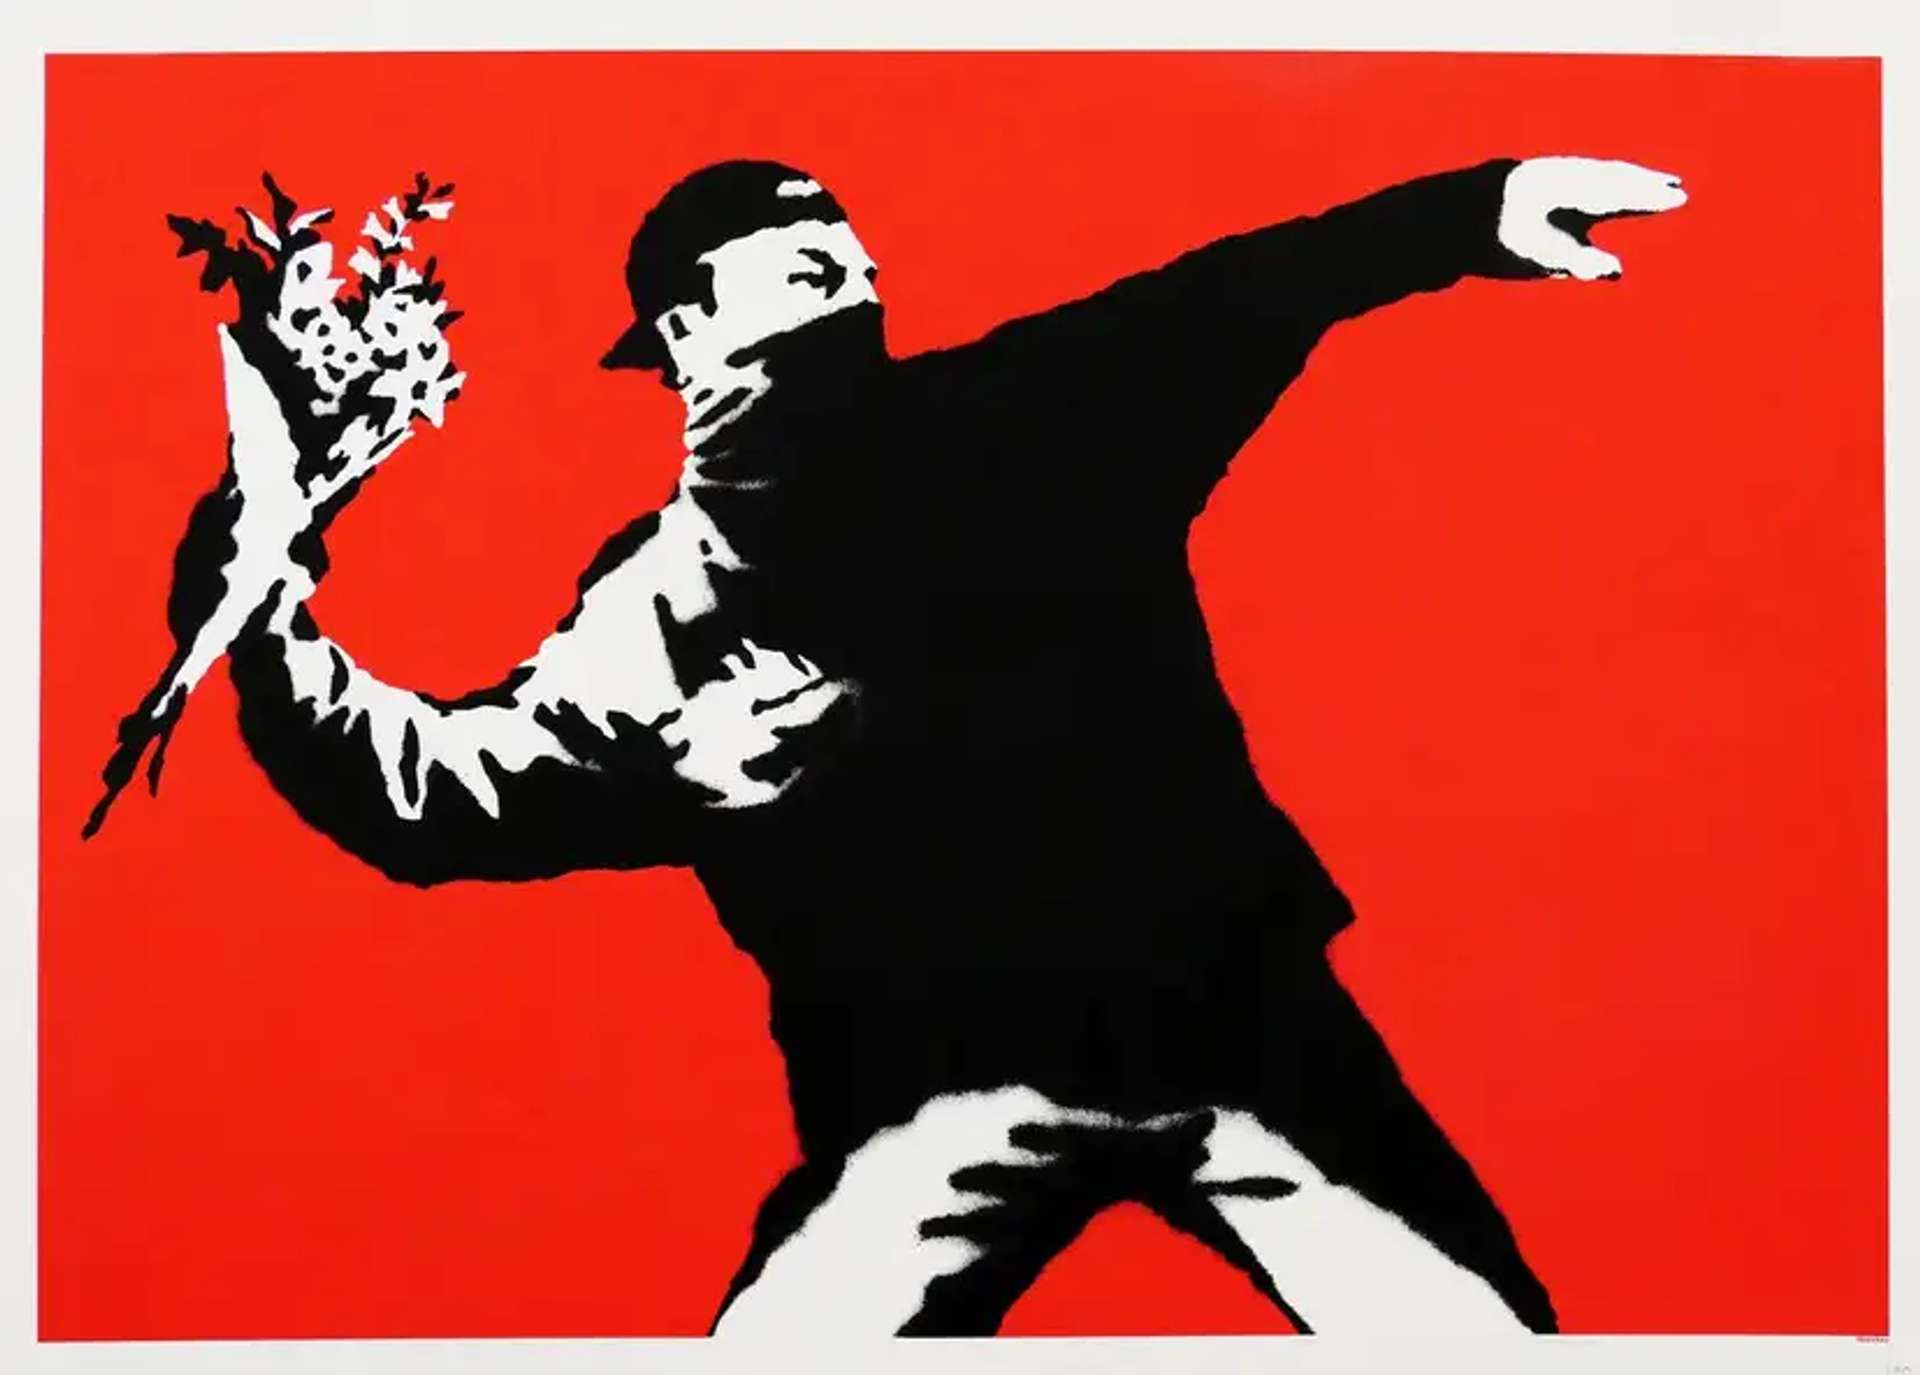 Screenprint by Banksy depicting a red background behind a masked man throwing a bouquet.